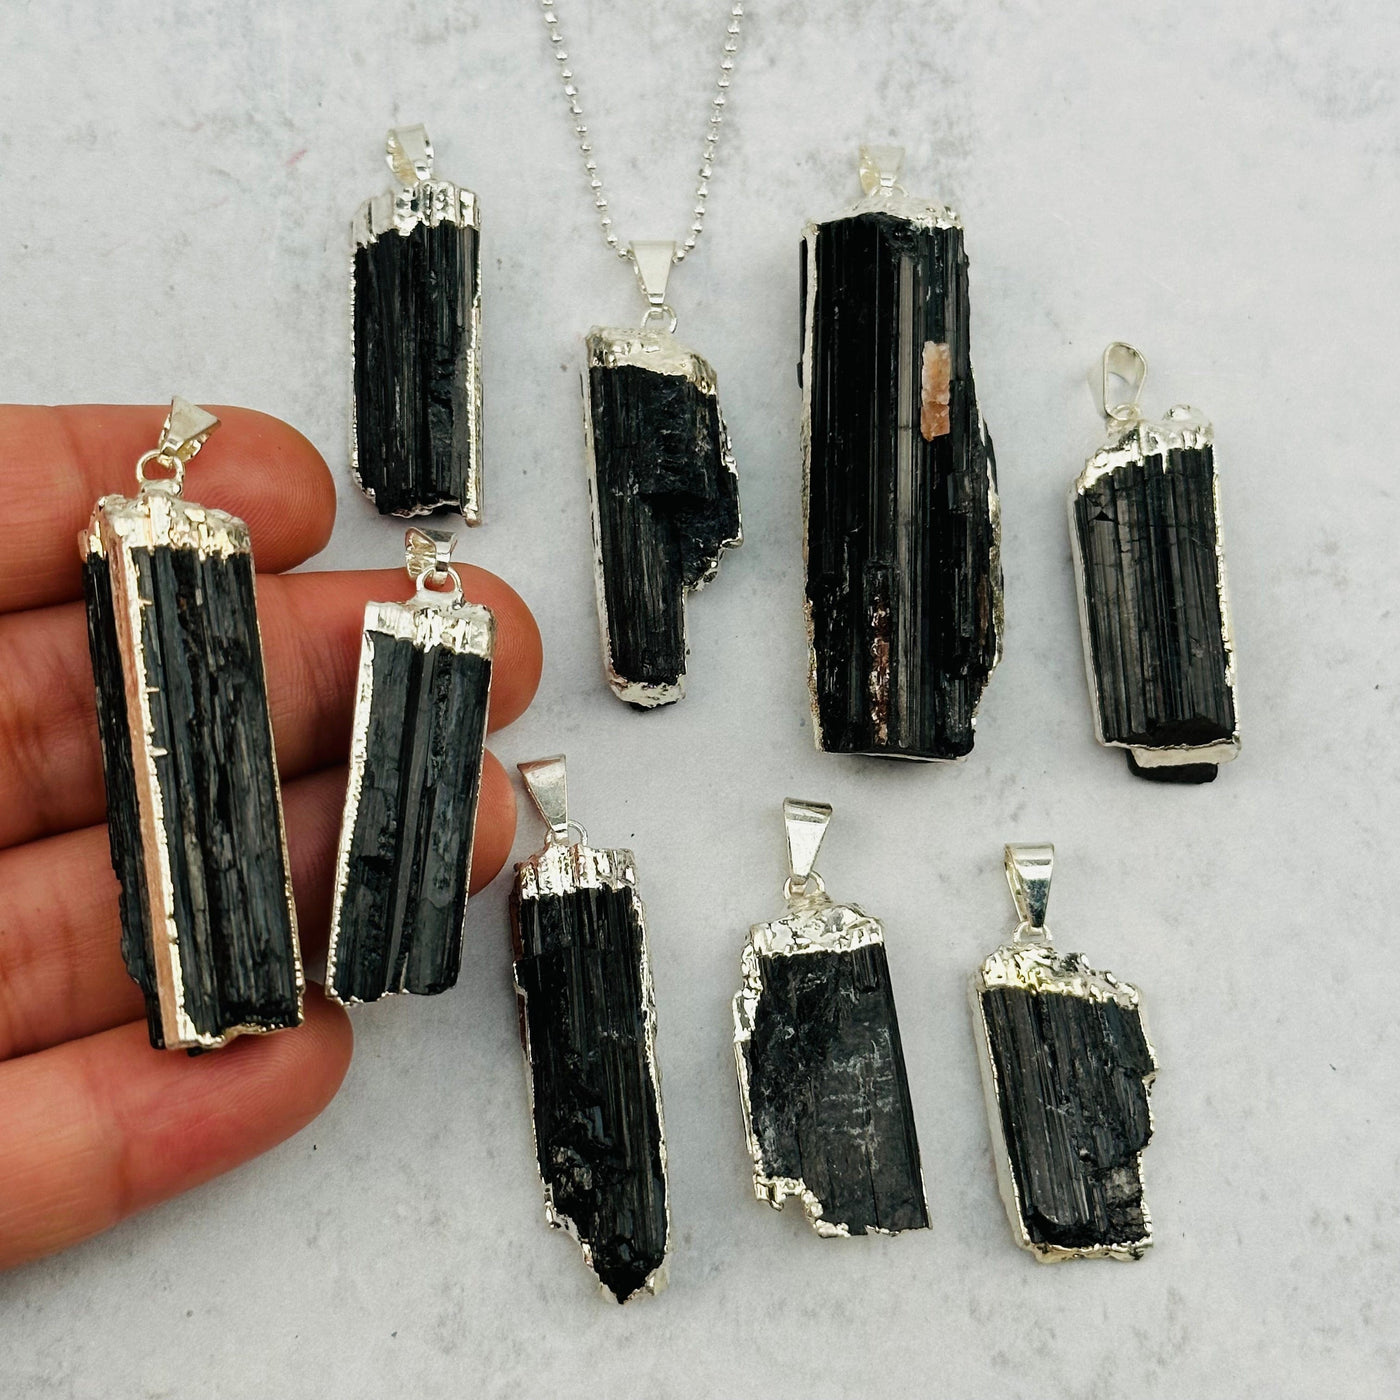 Black Tourmaline Pendant with Electroplated Silver Edges in hand for size reference 